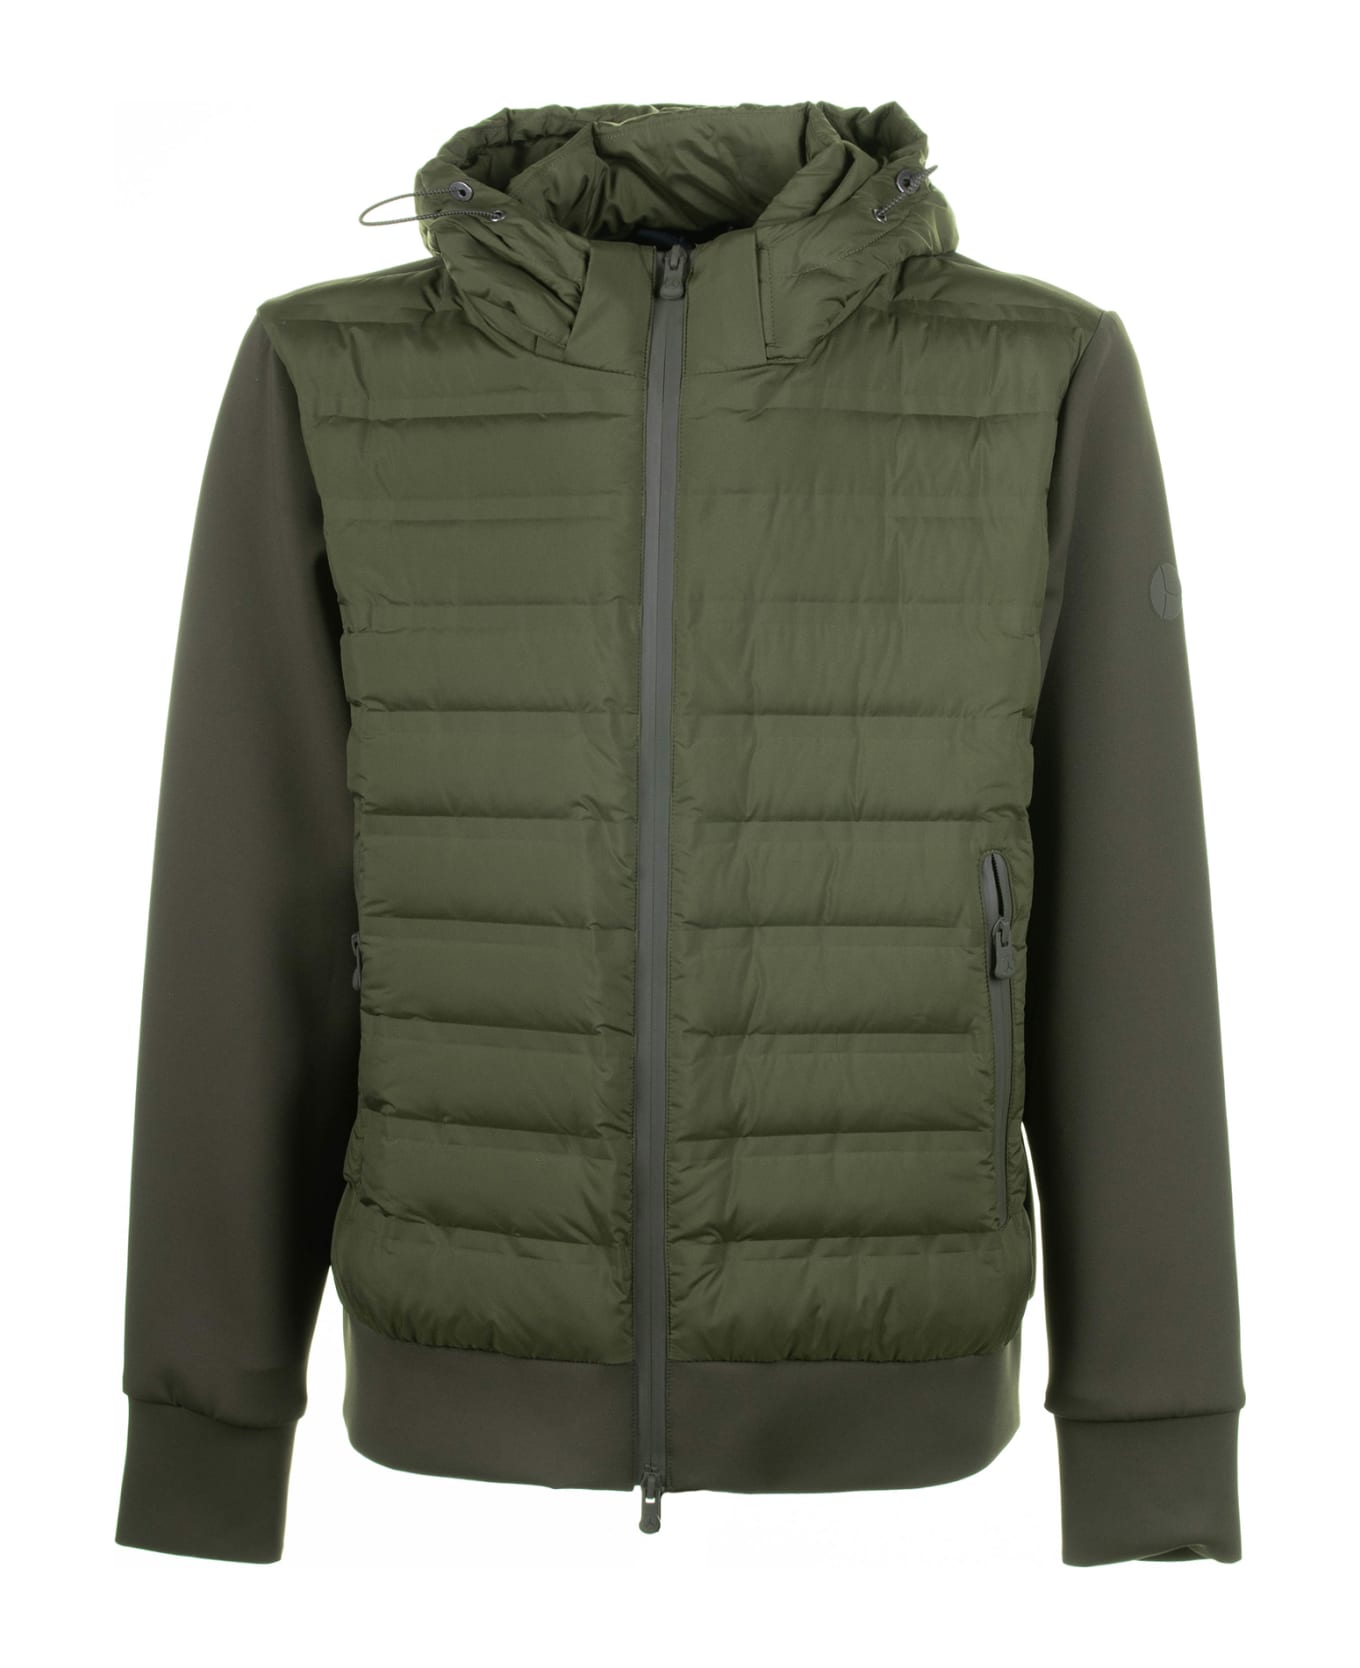 People Of Shibuya Green Quilted Jacket With Hood - VERDE ダウンジャケット